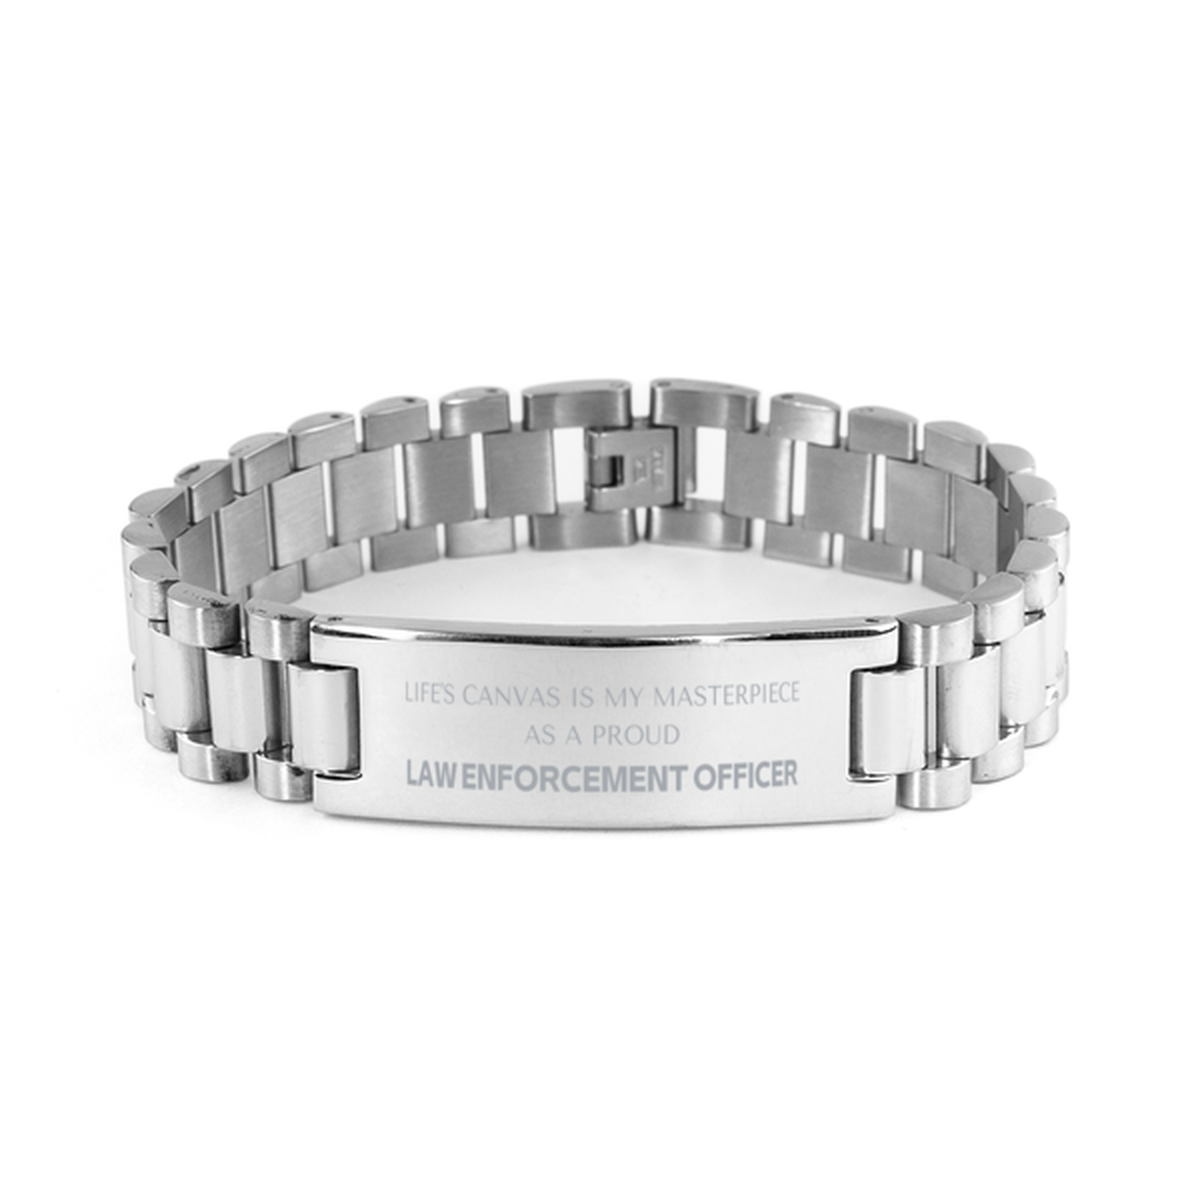 Proud Law Enforcement Officer Gifts, Life's canvas is my masterpiece, Epic Birthday Christmas Unique Ladder Stainless Steel Bracelet For Law Enforcement Officer, Coworkers, Men, Women, Friends